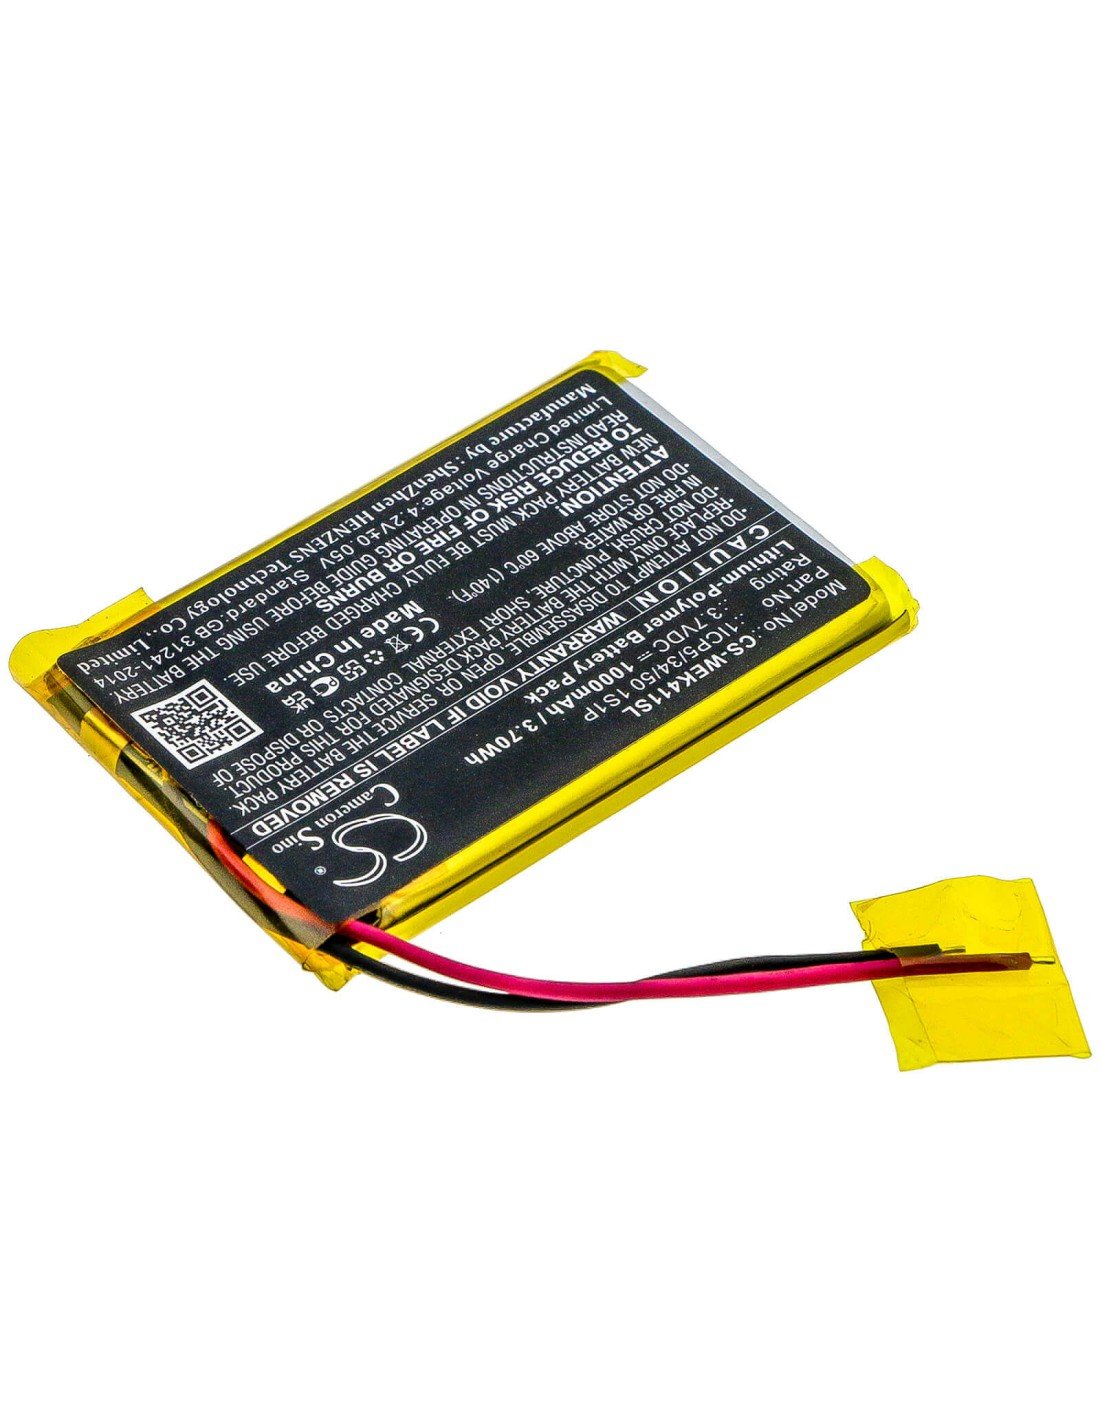 Wacom, Ack411050, Express Key Remote replacement battery